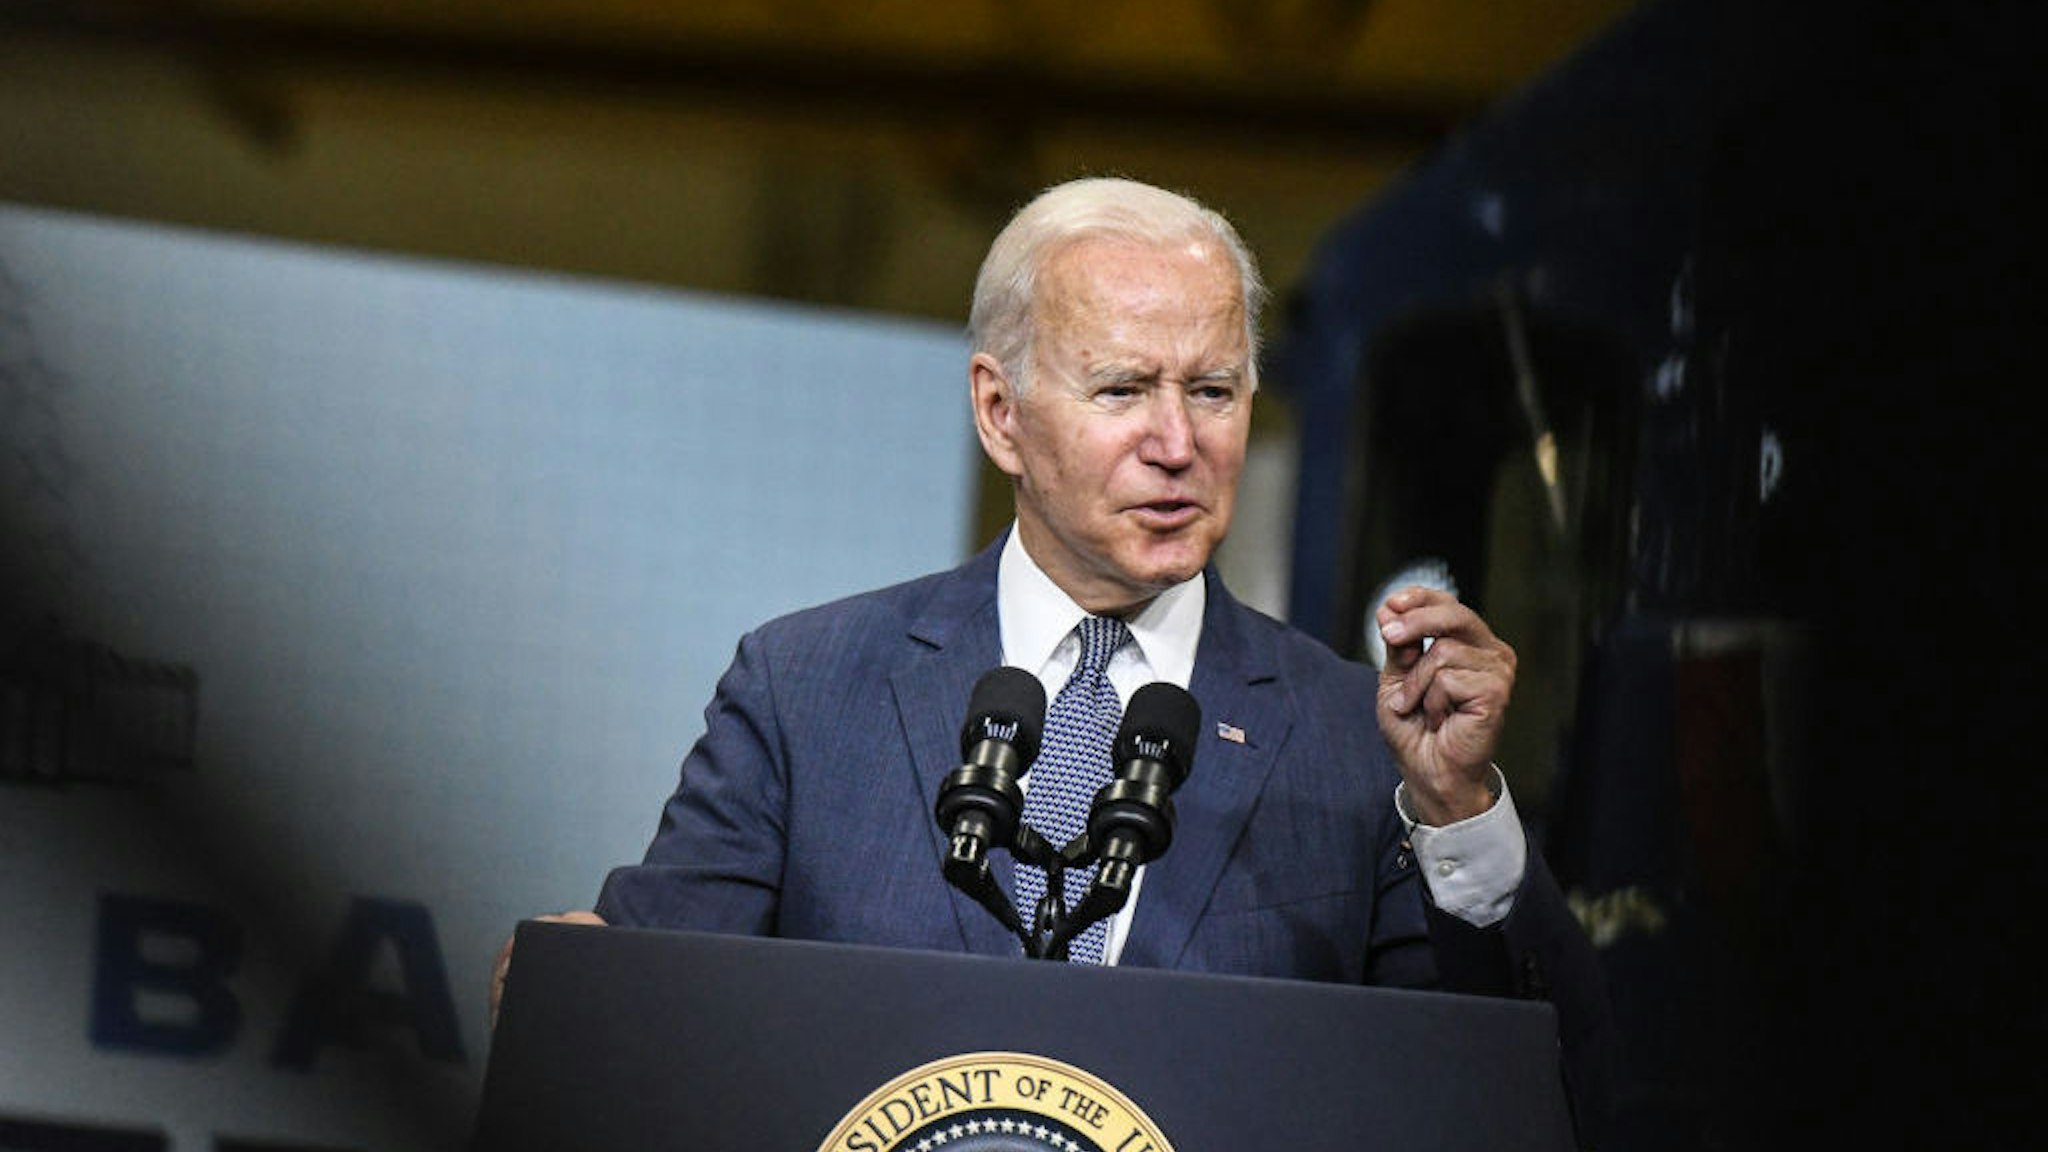 U.S. President Joe Biden speaks at the NJ Transit Meadowlands Maintenance Complex in Kearny, New Jersey, U.S., on Monday, Oct. 25, 2021. Biden will argue that his economic agenda will ease rail congestion in the Northeast Corridor during a trip to the state today that will put him alongside New Jersey Governor Phil Murphy ahead of next week's election. Photographer: Stephanie Keith/Bloomberg